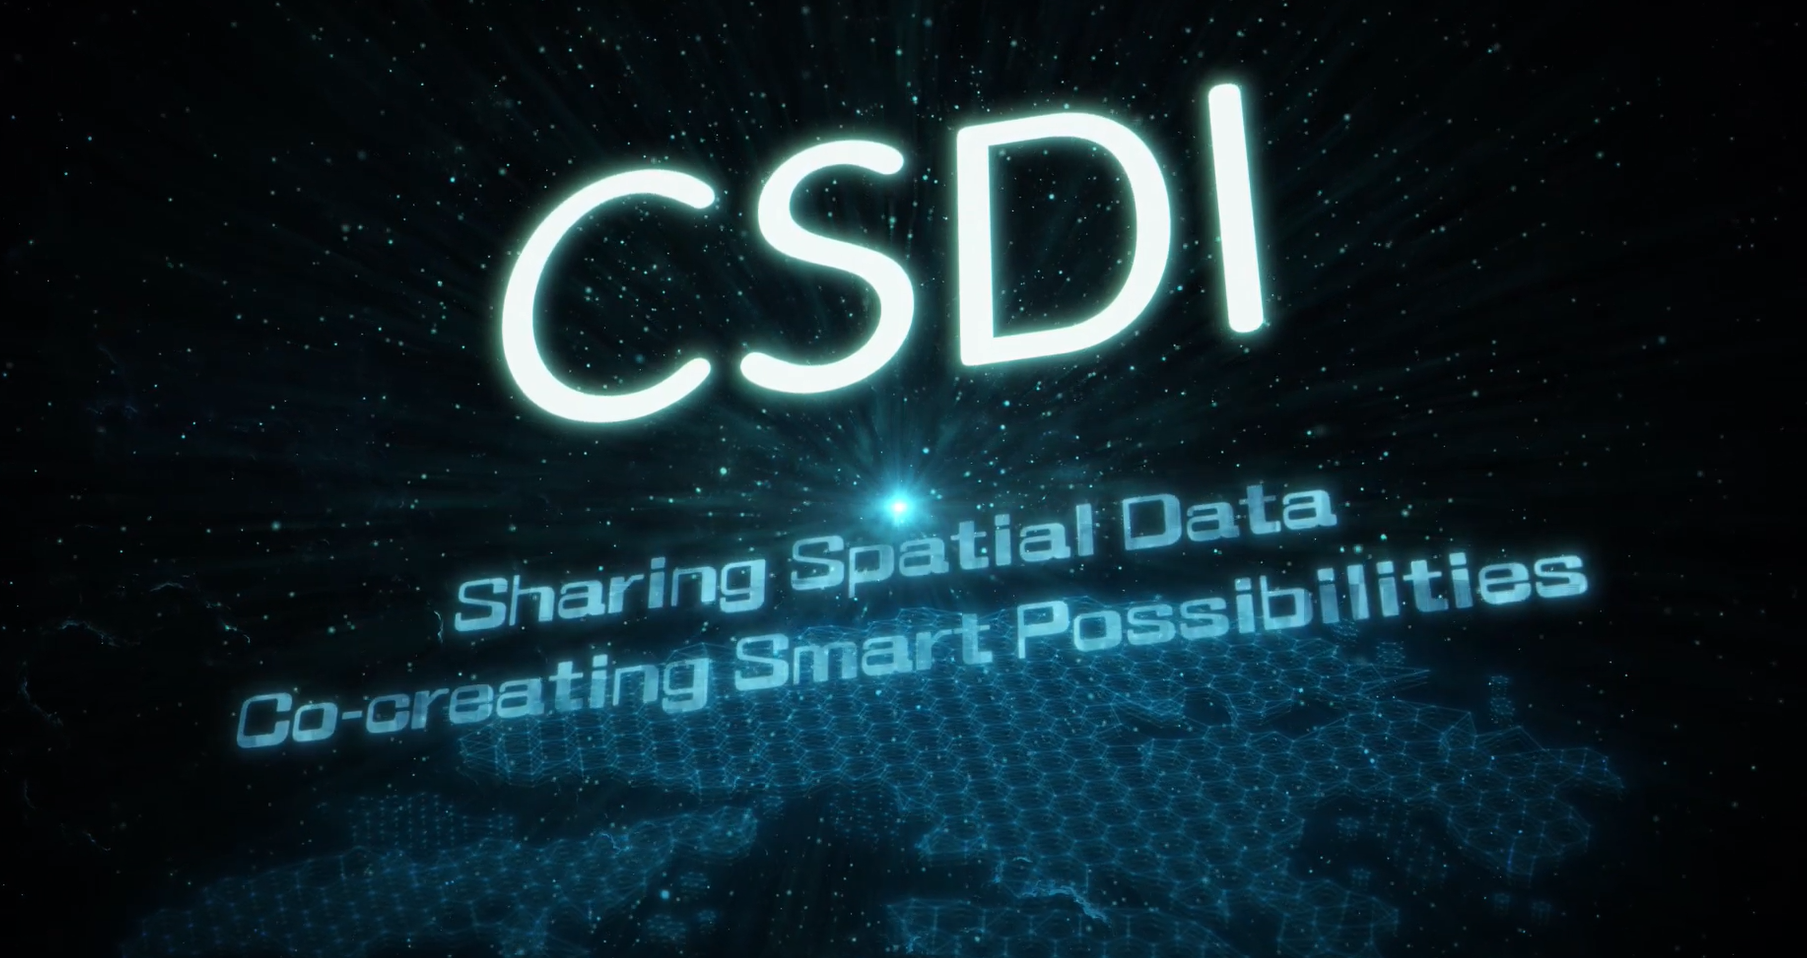 Sharing Spatial Data Co-creating Smart Possibilities